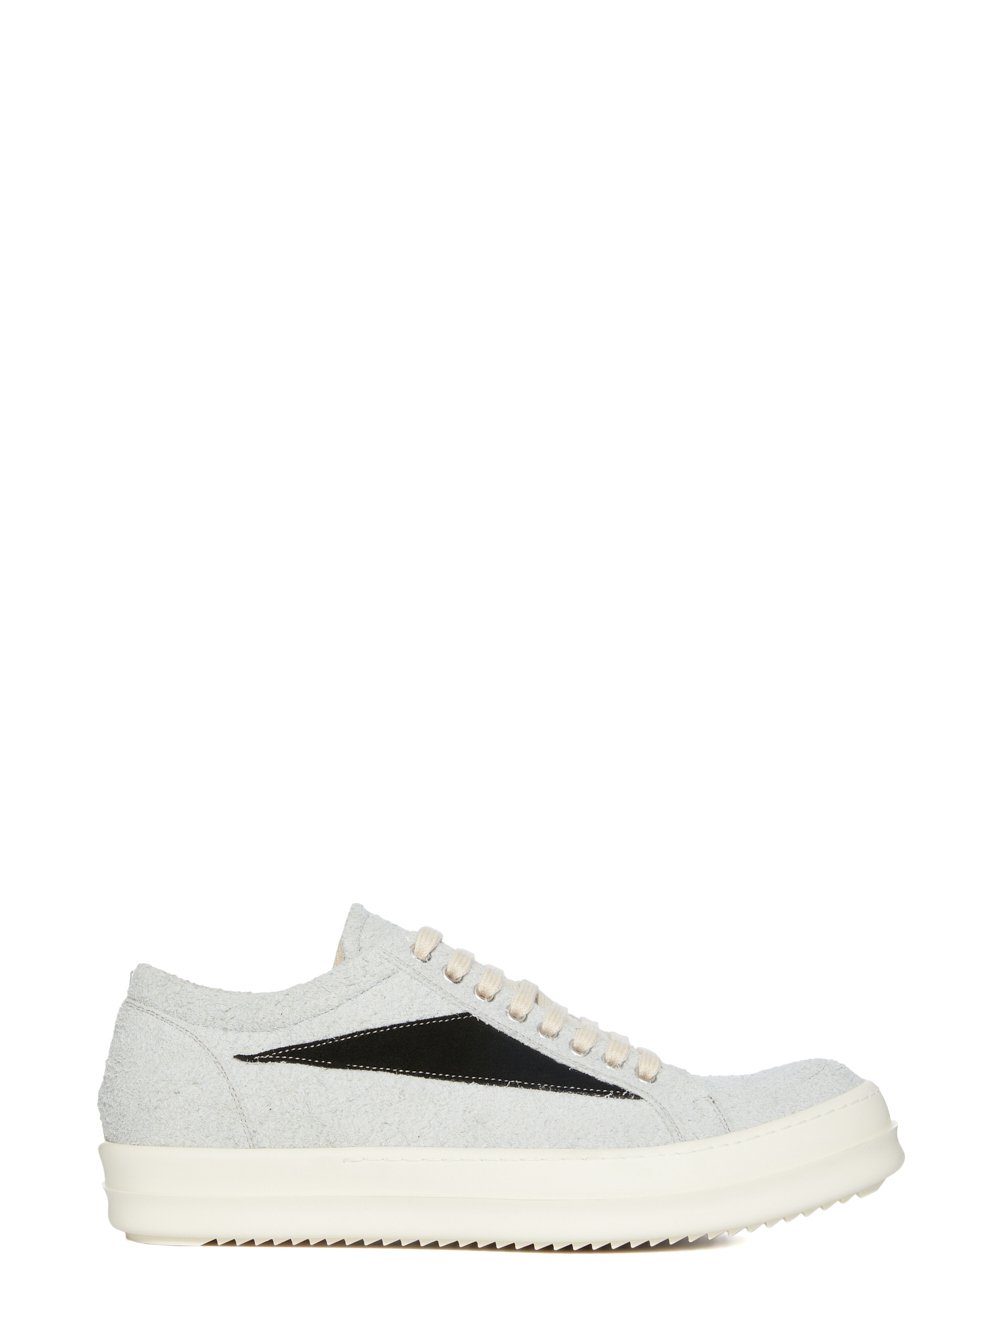 DRKSHDW FW23 LUXOR VINTAGE SNEAKS IN OYSTER, BLACK AND MILK SHAGGY COTTON SUEDE